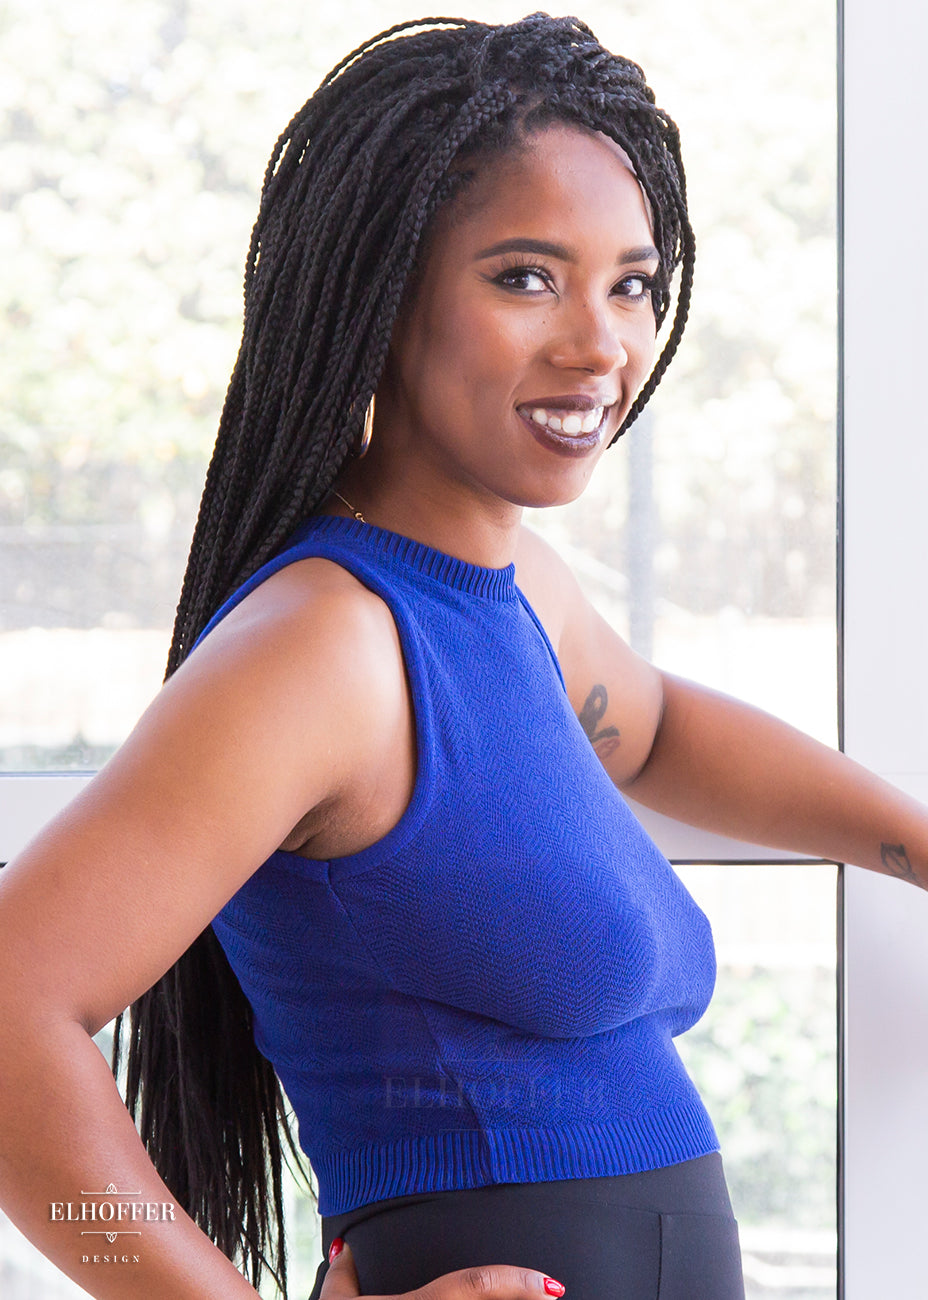 Krystina, a size small medium dark skinned model with long dark braids, shows off the size profile of the royal blue knit top.